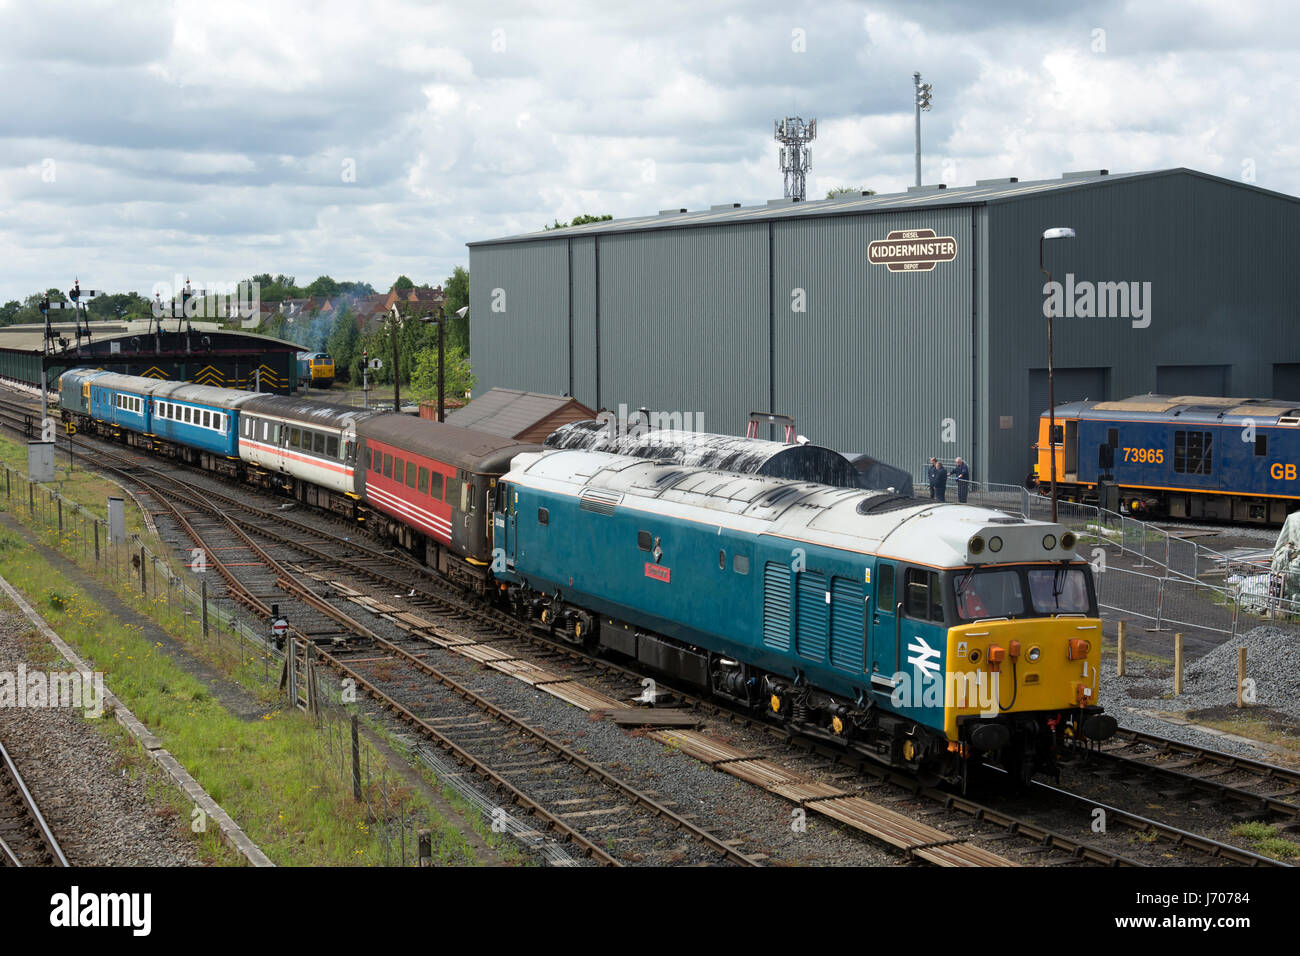 Class 50 diesel locomotive No 50008 'Thunderer' pulling a train at the Severn Valley Railway, Kidderminster, UK Stock Photo